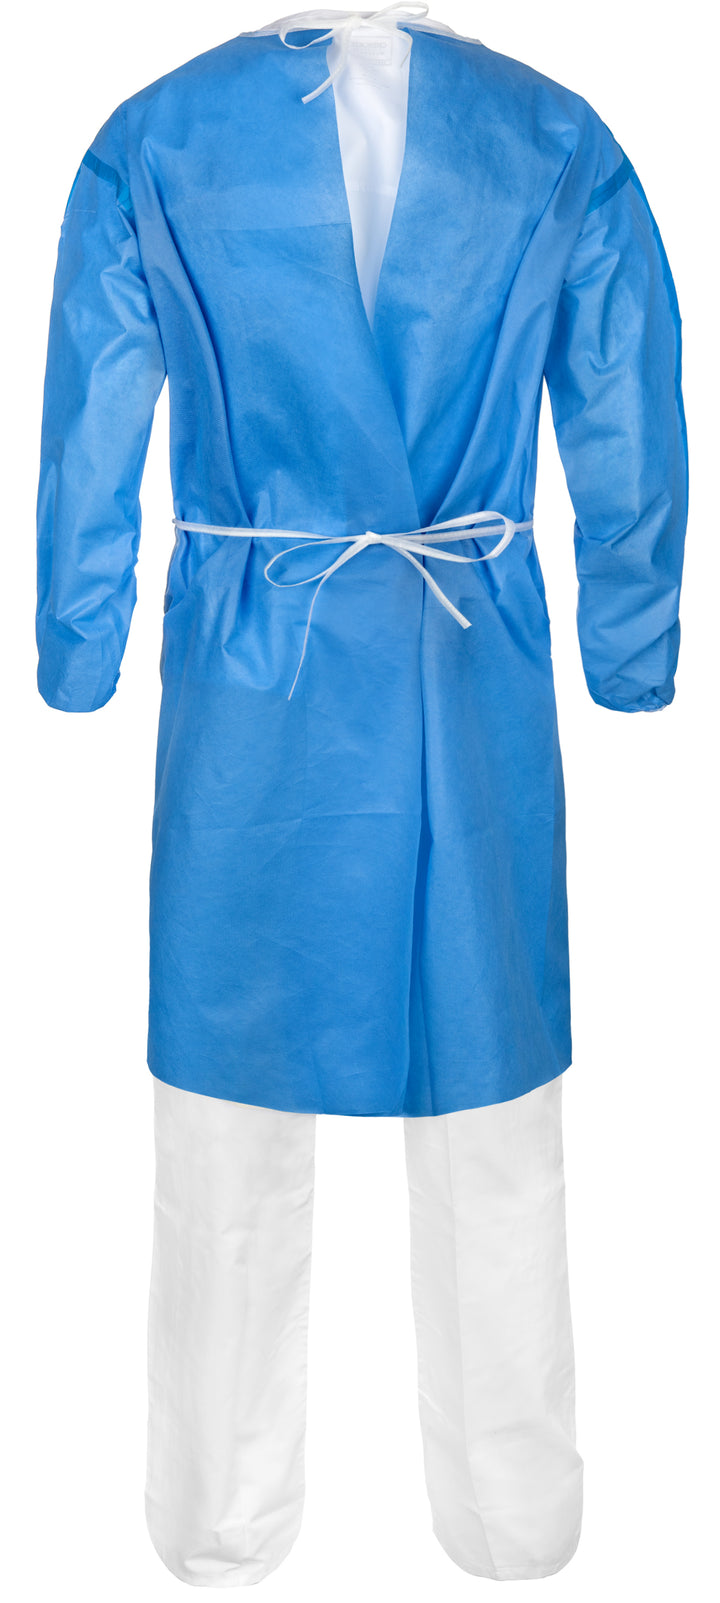 Lakeland AAMI Level 2 Isolation Gown, C8192TIG, 20/ Bag, 5 Bags/ Case